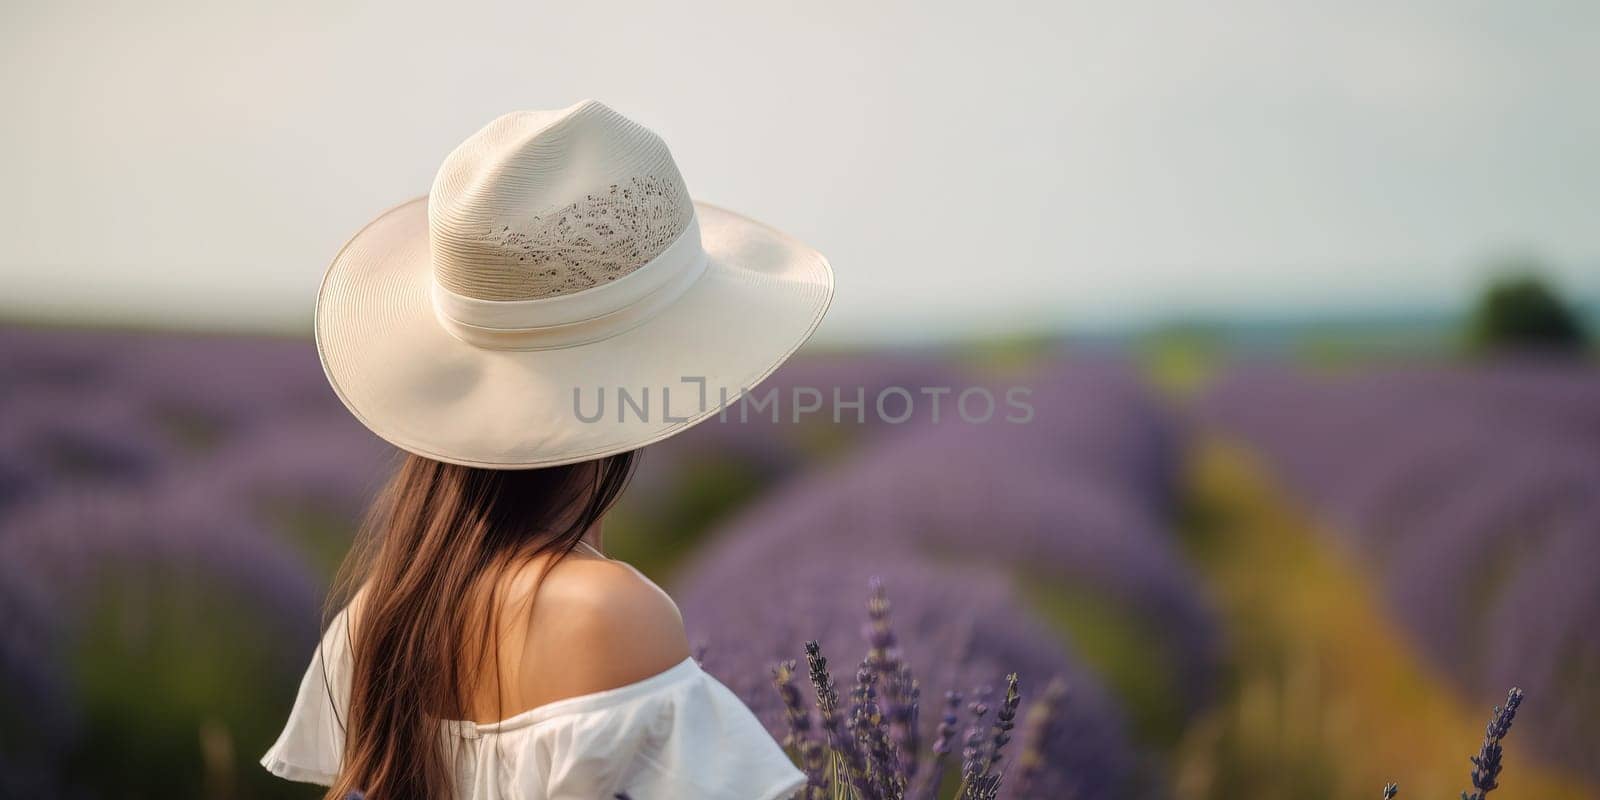 Stylish Young Lady In A White Hat On A Lavender Field by tan4ikk1